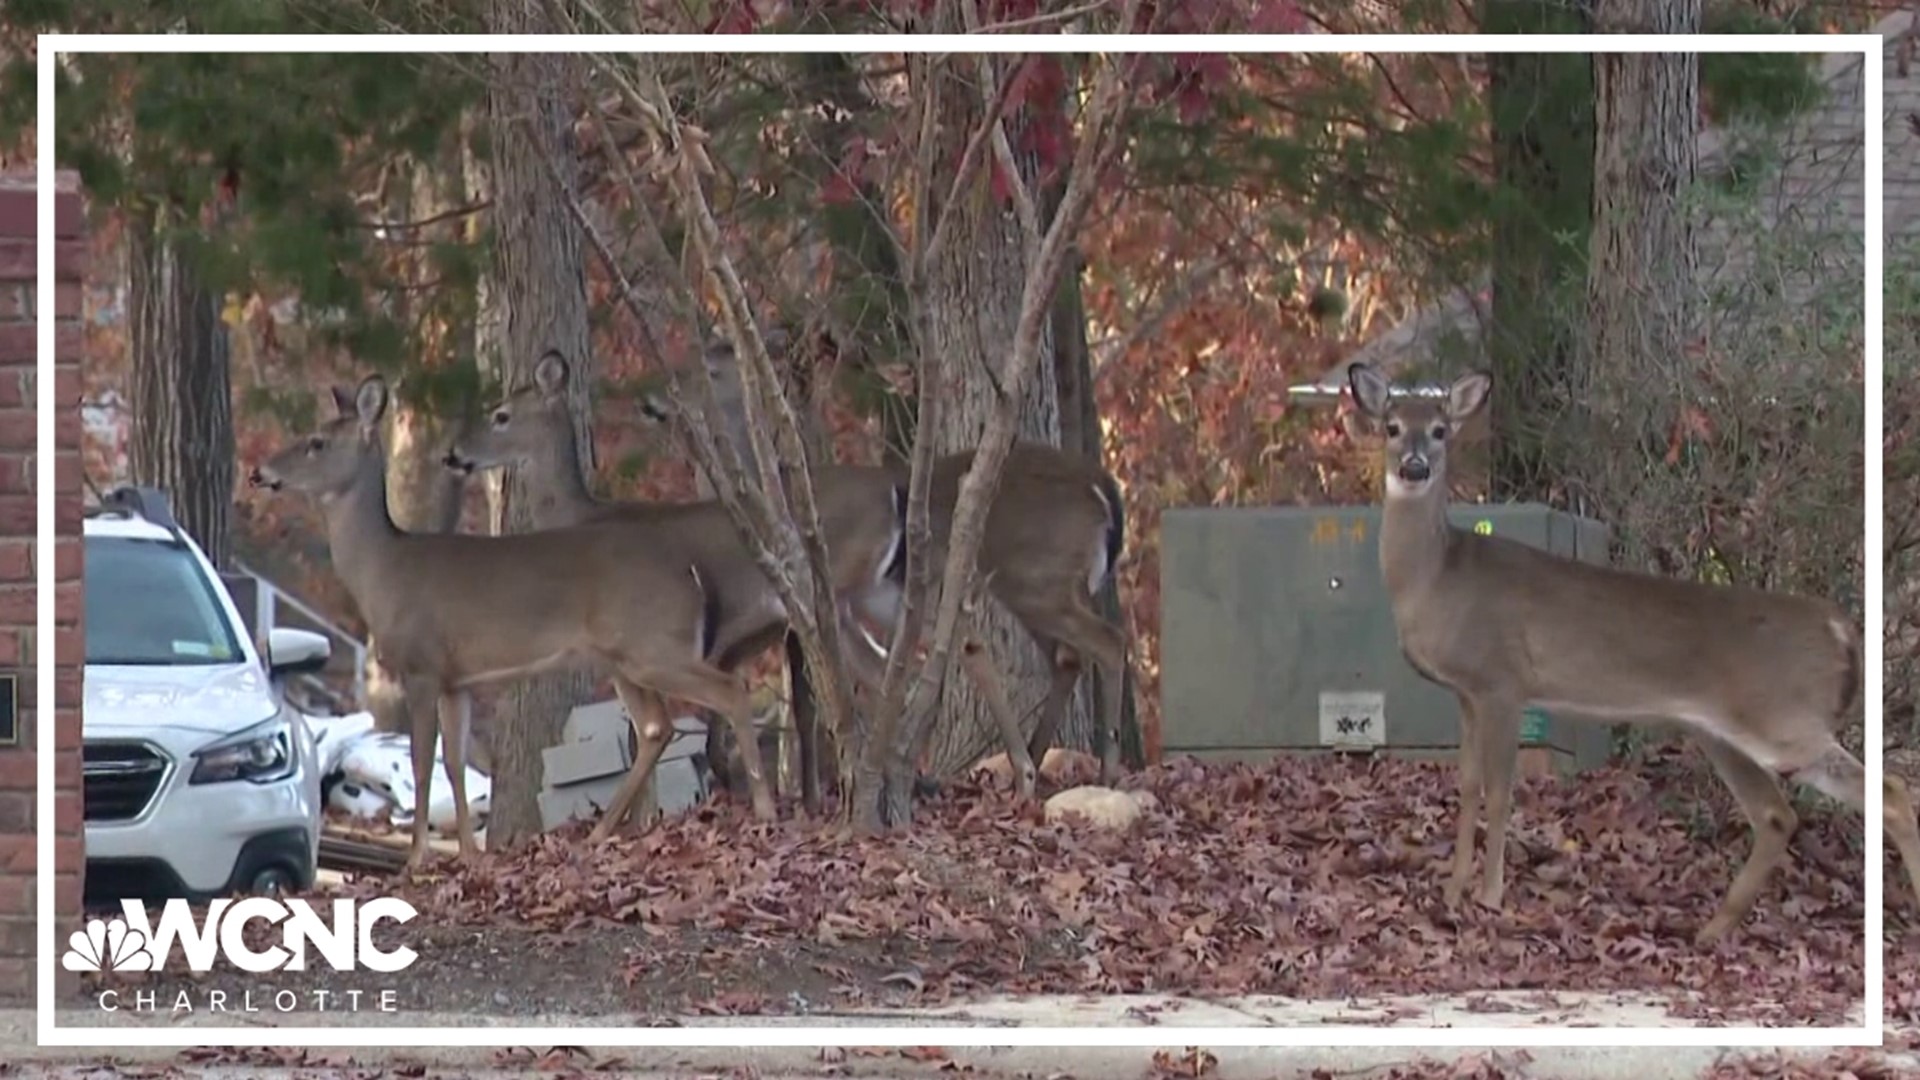 Handling the deer population in Matthews is controversial, with growing concerns about overpopulation as others find enjoyment in the wildlife.